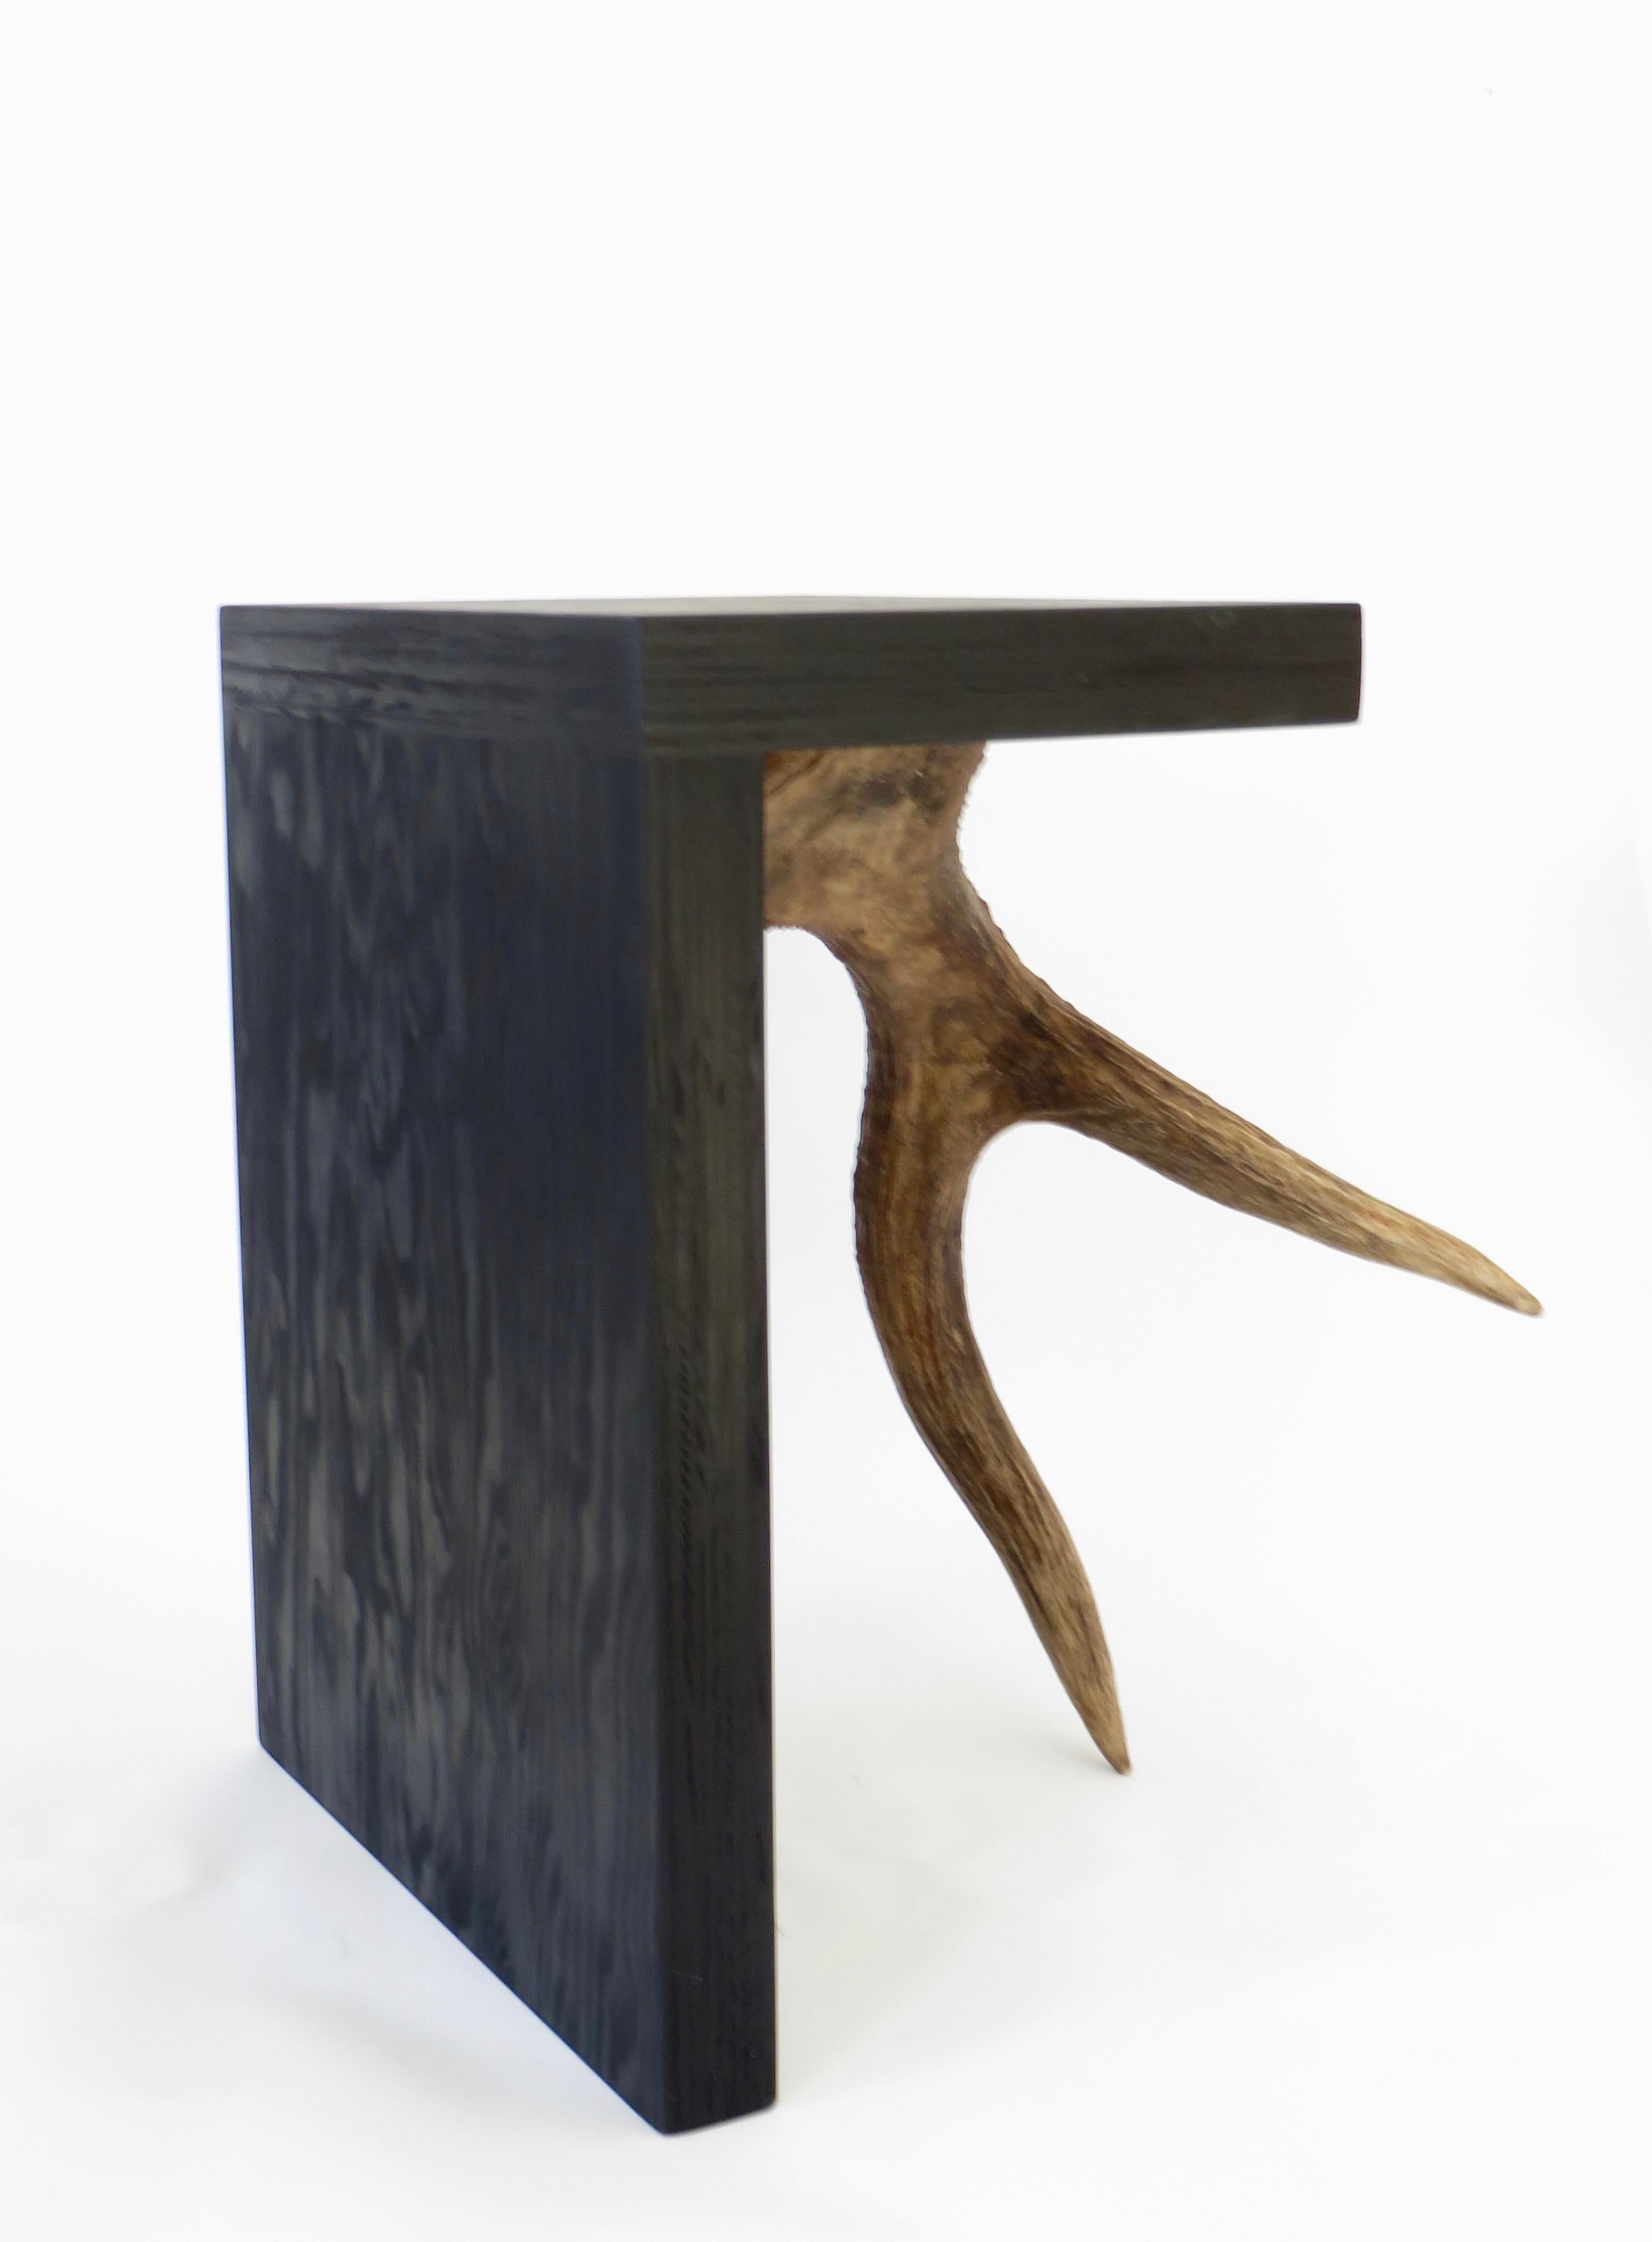 Black ebonized stained solid plywood forms with elk or moose antler.
Iconic Rick Owens use of natural and organic modern materials.
These are from the open edition series.
Each stool is signed on the base and is a piece unique. May be used as